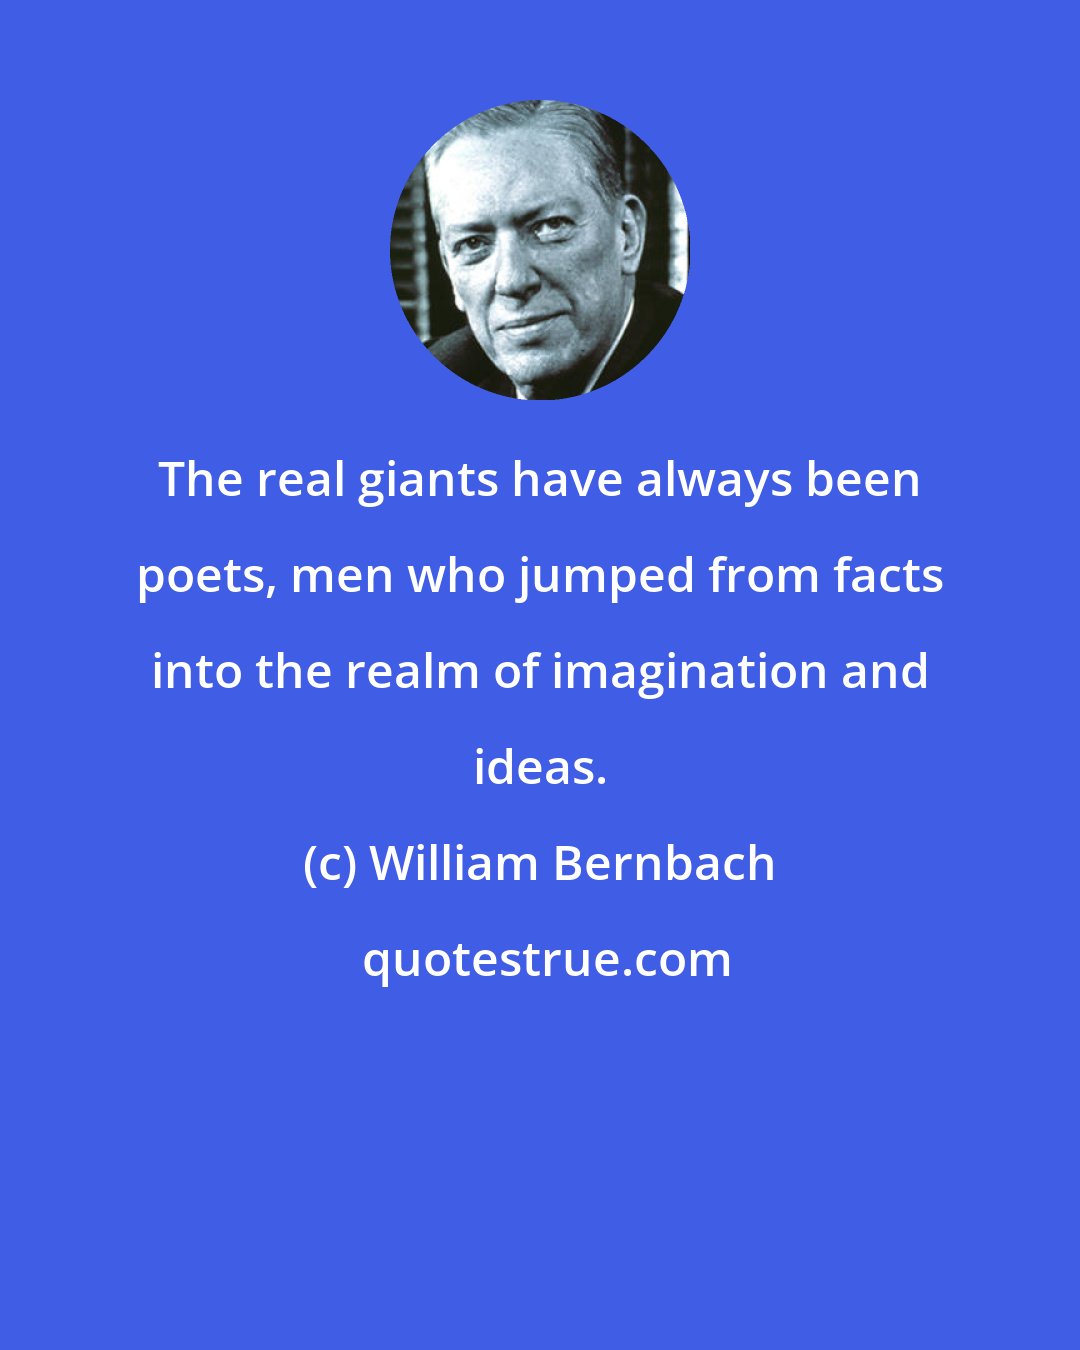 William Bernbach: The real giants have always been poets, men who jumped from facts into the realm of imagination and ideas.